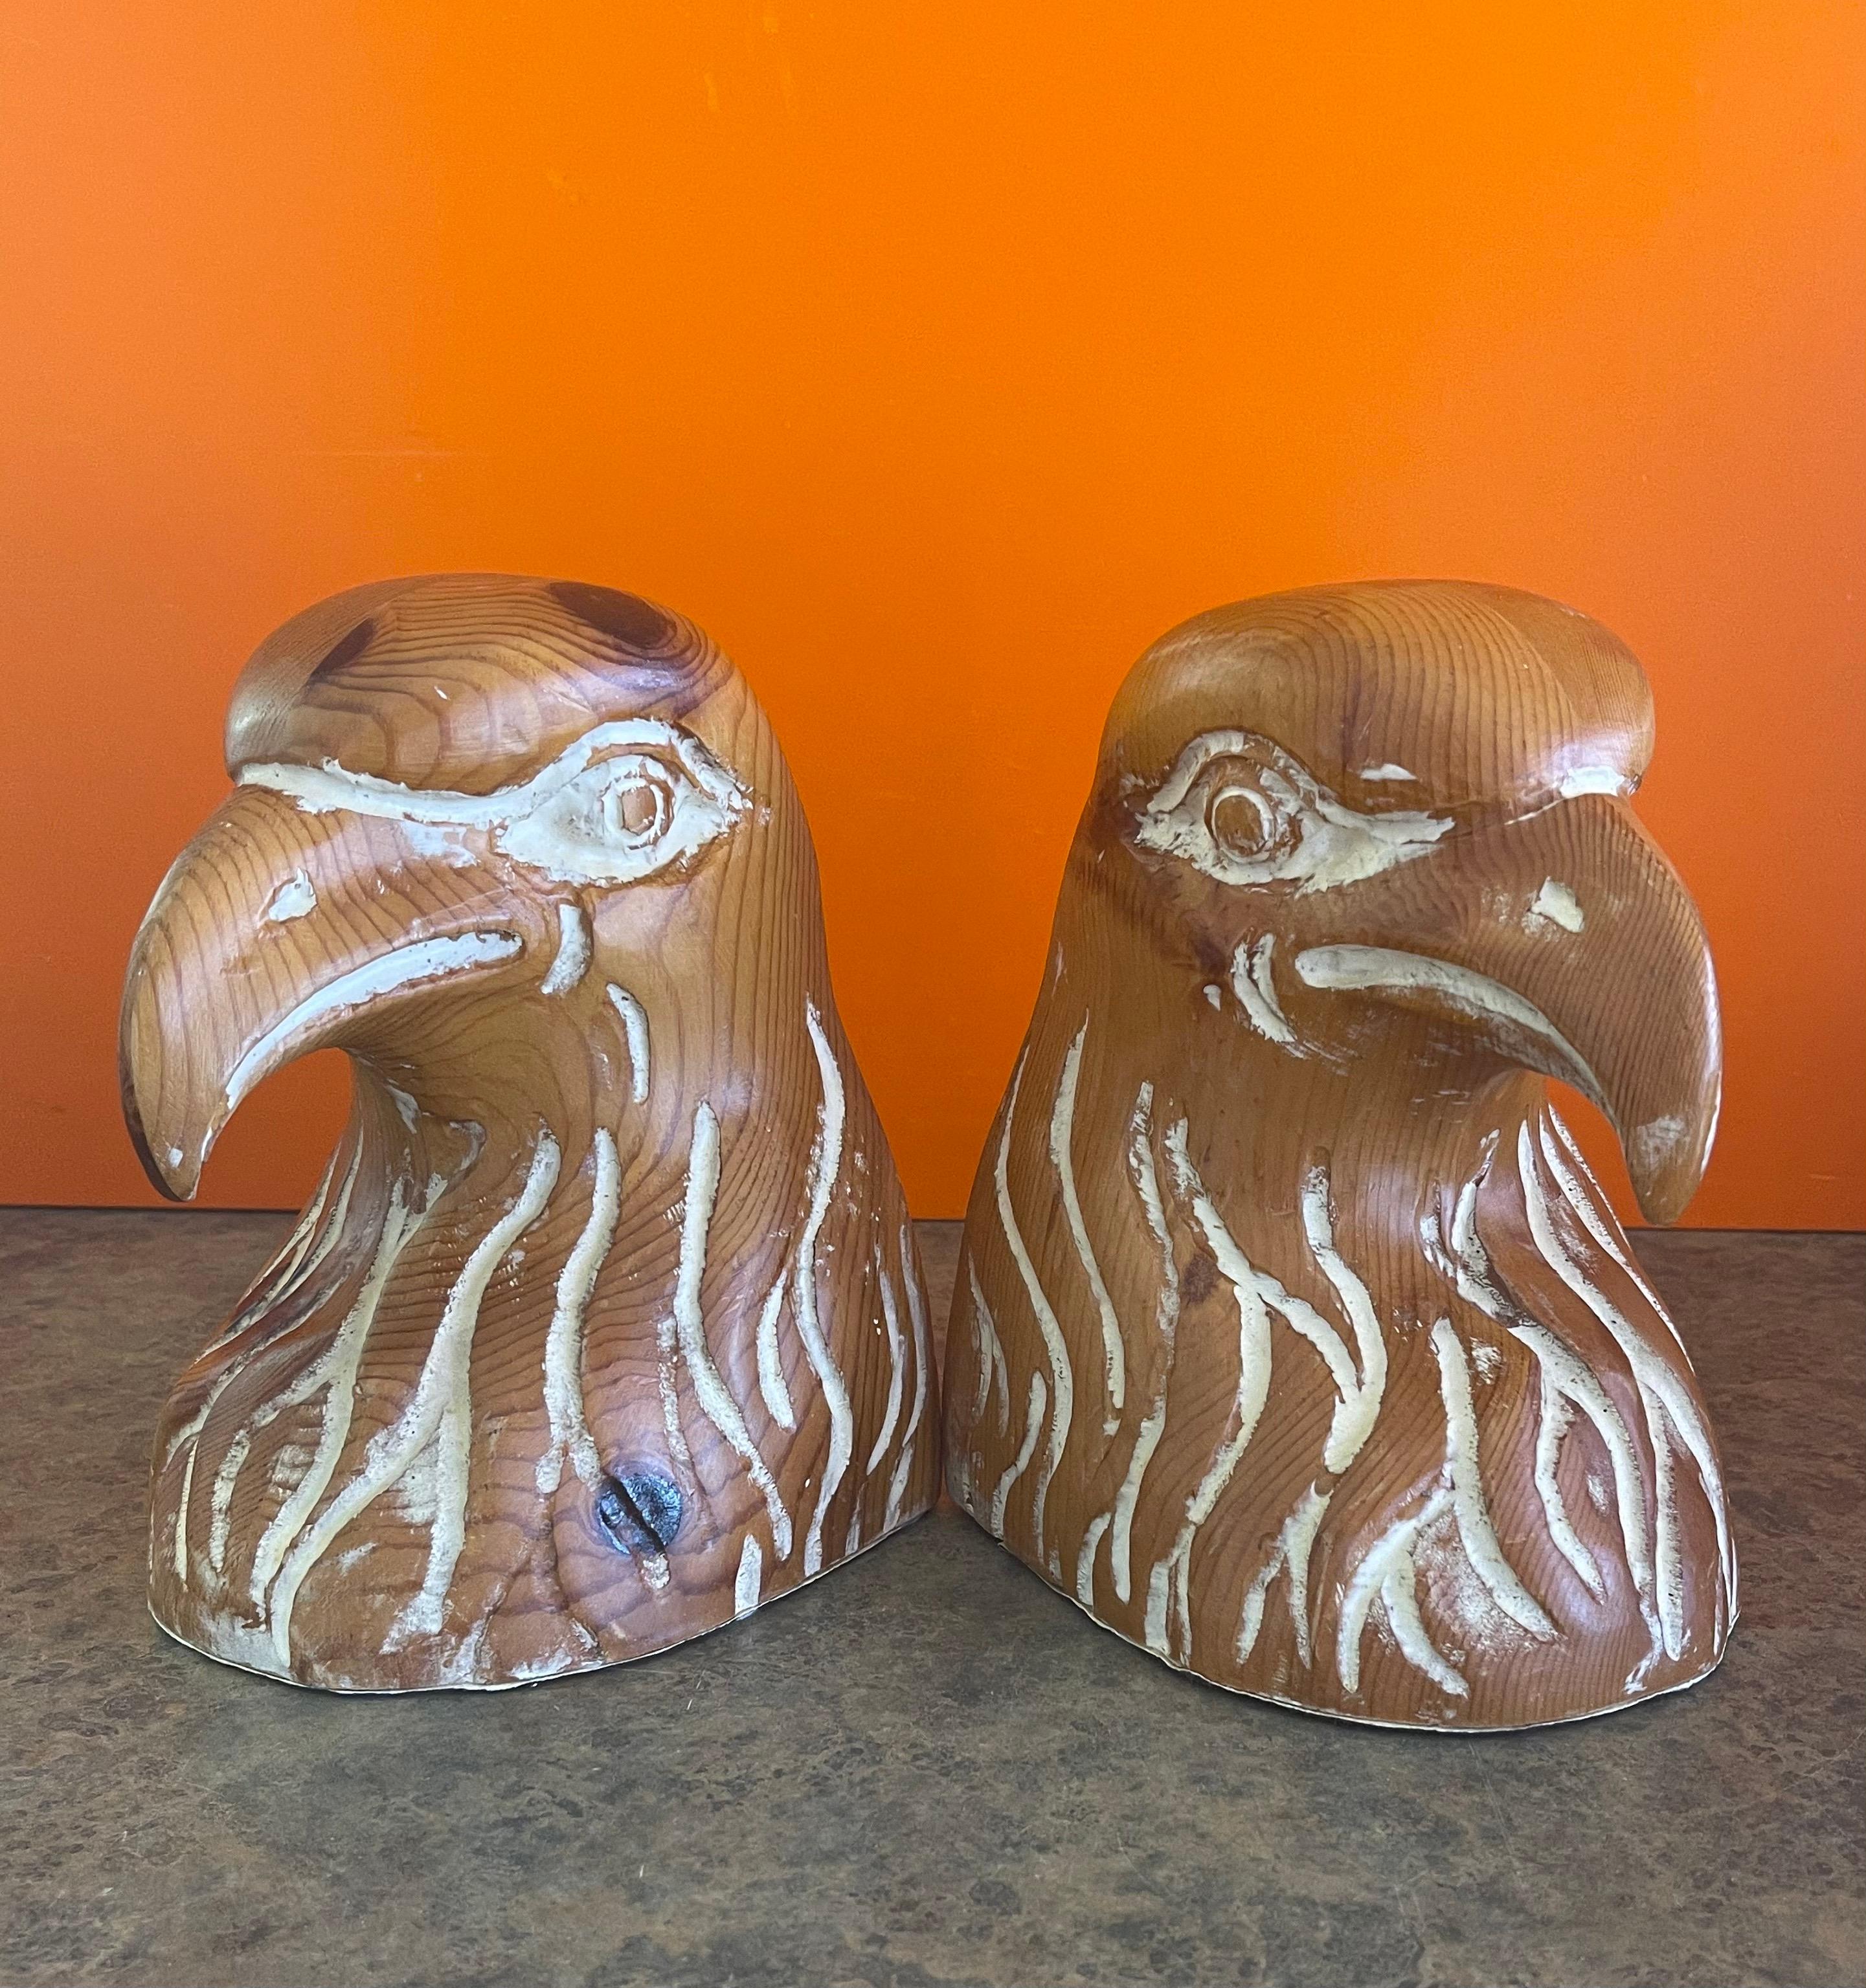 A striking pair of hand carved knotty pine eagle head bookends by Sarreid, circa 1970s. The bookends, which were made in Spain, are in very good condition and have a white wash overlay finish. They measure 10